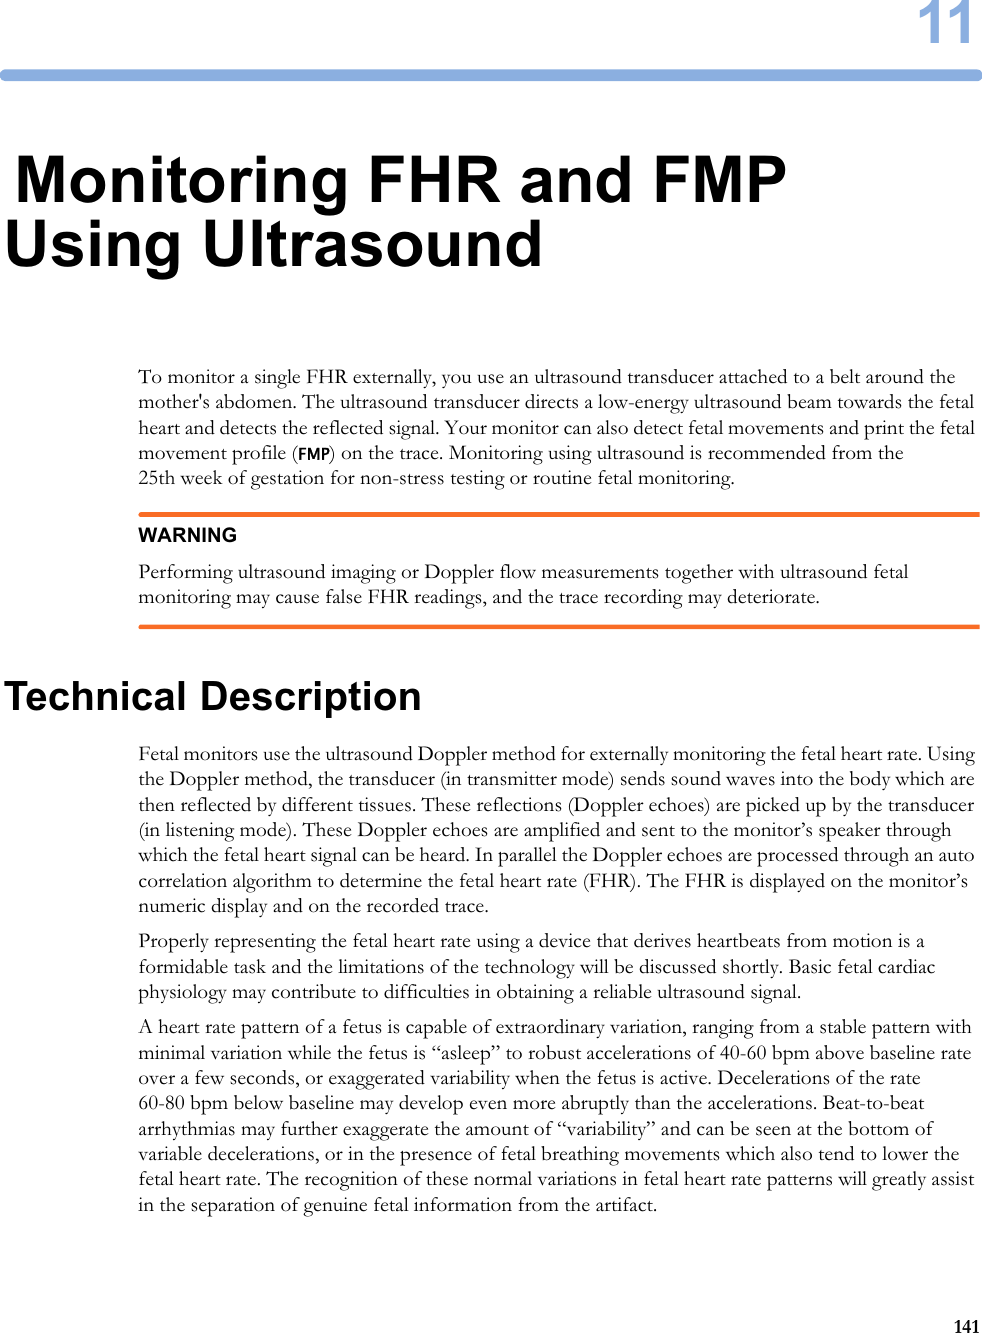 1114111Monitoring FHR and FMP Using UltrasoundTo monitor a single FHR externally, you use an ultrasound transducer attached to a belt around the mother&apos;s abdomen. The ultrasound transducer directs a low-energy ultrasound beam towards the fetal heart and detects the reflected signal. Your monitor can also detect fetal movements and print the fetal movement profile (FMP) on the trace. Monitoring using ultrasound is recommended from the 25th week of gestation for non-stress testing or routine fetal monitoring.WARNINGPerforming ultrasound imaging or Doppler flow measurements together with ultrasound fetal monitoring may cause false FHR readings, and the trace recording may deteriorate.Technical DescriptionFetal monitors use the ultrasound Doppler method for externally monitoring the fetal heart rate. Using the Doppler method, the transducer (in transmitter mode) sends sound waves into the body which are then reflected by different tissues. These reflections (Doppler echoes) are picked up by the transducer (in listening mode). These Doppler echoes are amplified and sent to the monitor’s speaker through which the fetal heart signal can be heard. In parallel the Doppler echoes are processed through an auto correlation algorithm to determine the fetal heart rate (FHR). The FHR is displayed on the monitor’s numeric display and on the recorded trace.Properly representing the fetal heart rate using a device that derives heartbeats from motion is a formidable task and the limitations of the technology will be discussed shortly. Basic fetal cardiac physiology may contribute to difficulties in obtaining a reliable ultrasound signal.A heart rate pattern of a fetus is capable of extraordinary variation, ranging from a stable pattern with minimal variation while the fetus is “asleep” to robust accelerations of 40-60 bpm above baseline rate over a few seconds, or exaggerated variability when the fetus is active. Decelerations of the rate 60-80 bpm below baseline may develop even more abruptly than the accelerations. Beat-to-beat arrhythmias may further exaggerate the amount of “variability” and can be seen at the bottom of variable decelerations, or in the presence of fetal breathing movements which also tend to lower the fetal heart rate. The recognition of these normal variations in fetal heart rate patterns will greatly assist in the separation of genuine fetal information from the artifact.